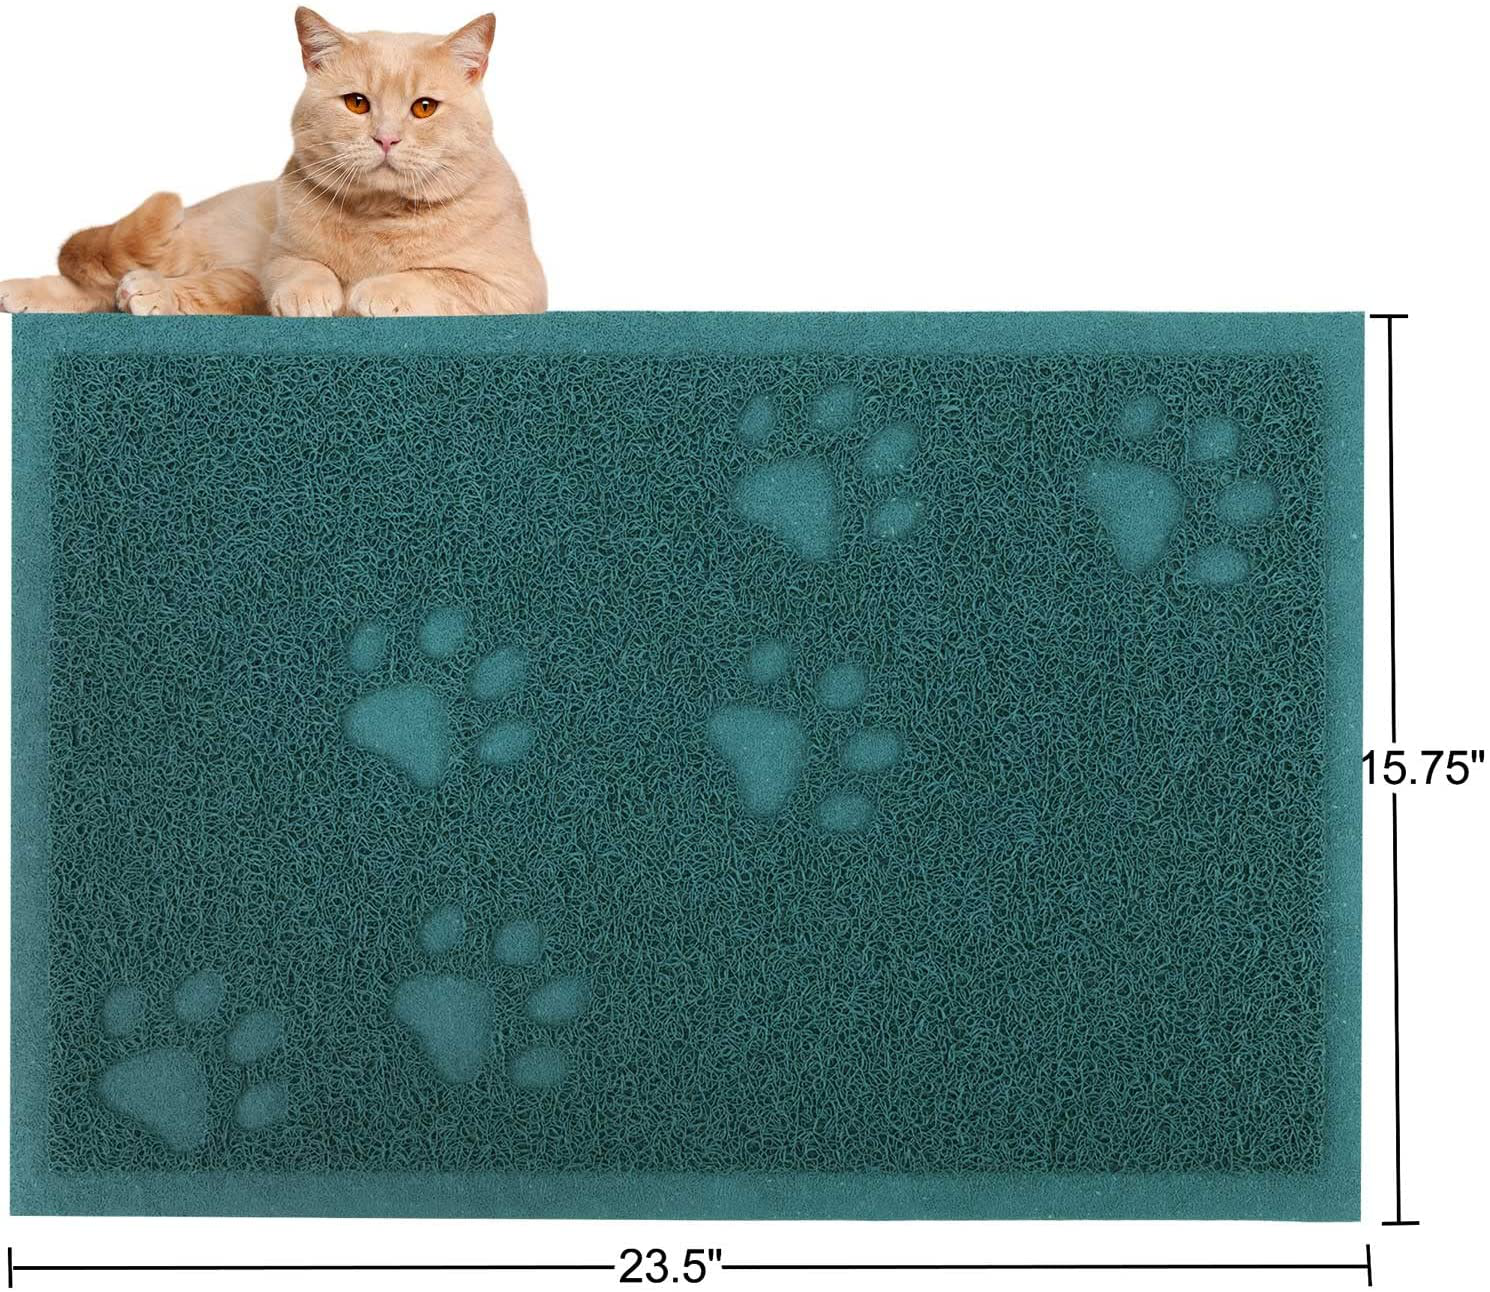 URDOGSL Cat Litter Mat, Premium Durable Cat Litter Trapping Mat for Litter Boxes, Water Resistant and Scatter Control Cat Feeding Mat, Non-Slip Backing, Easy to Clean